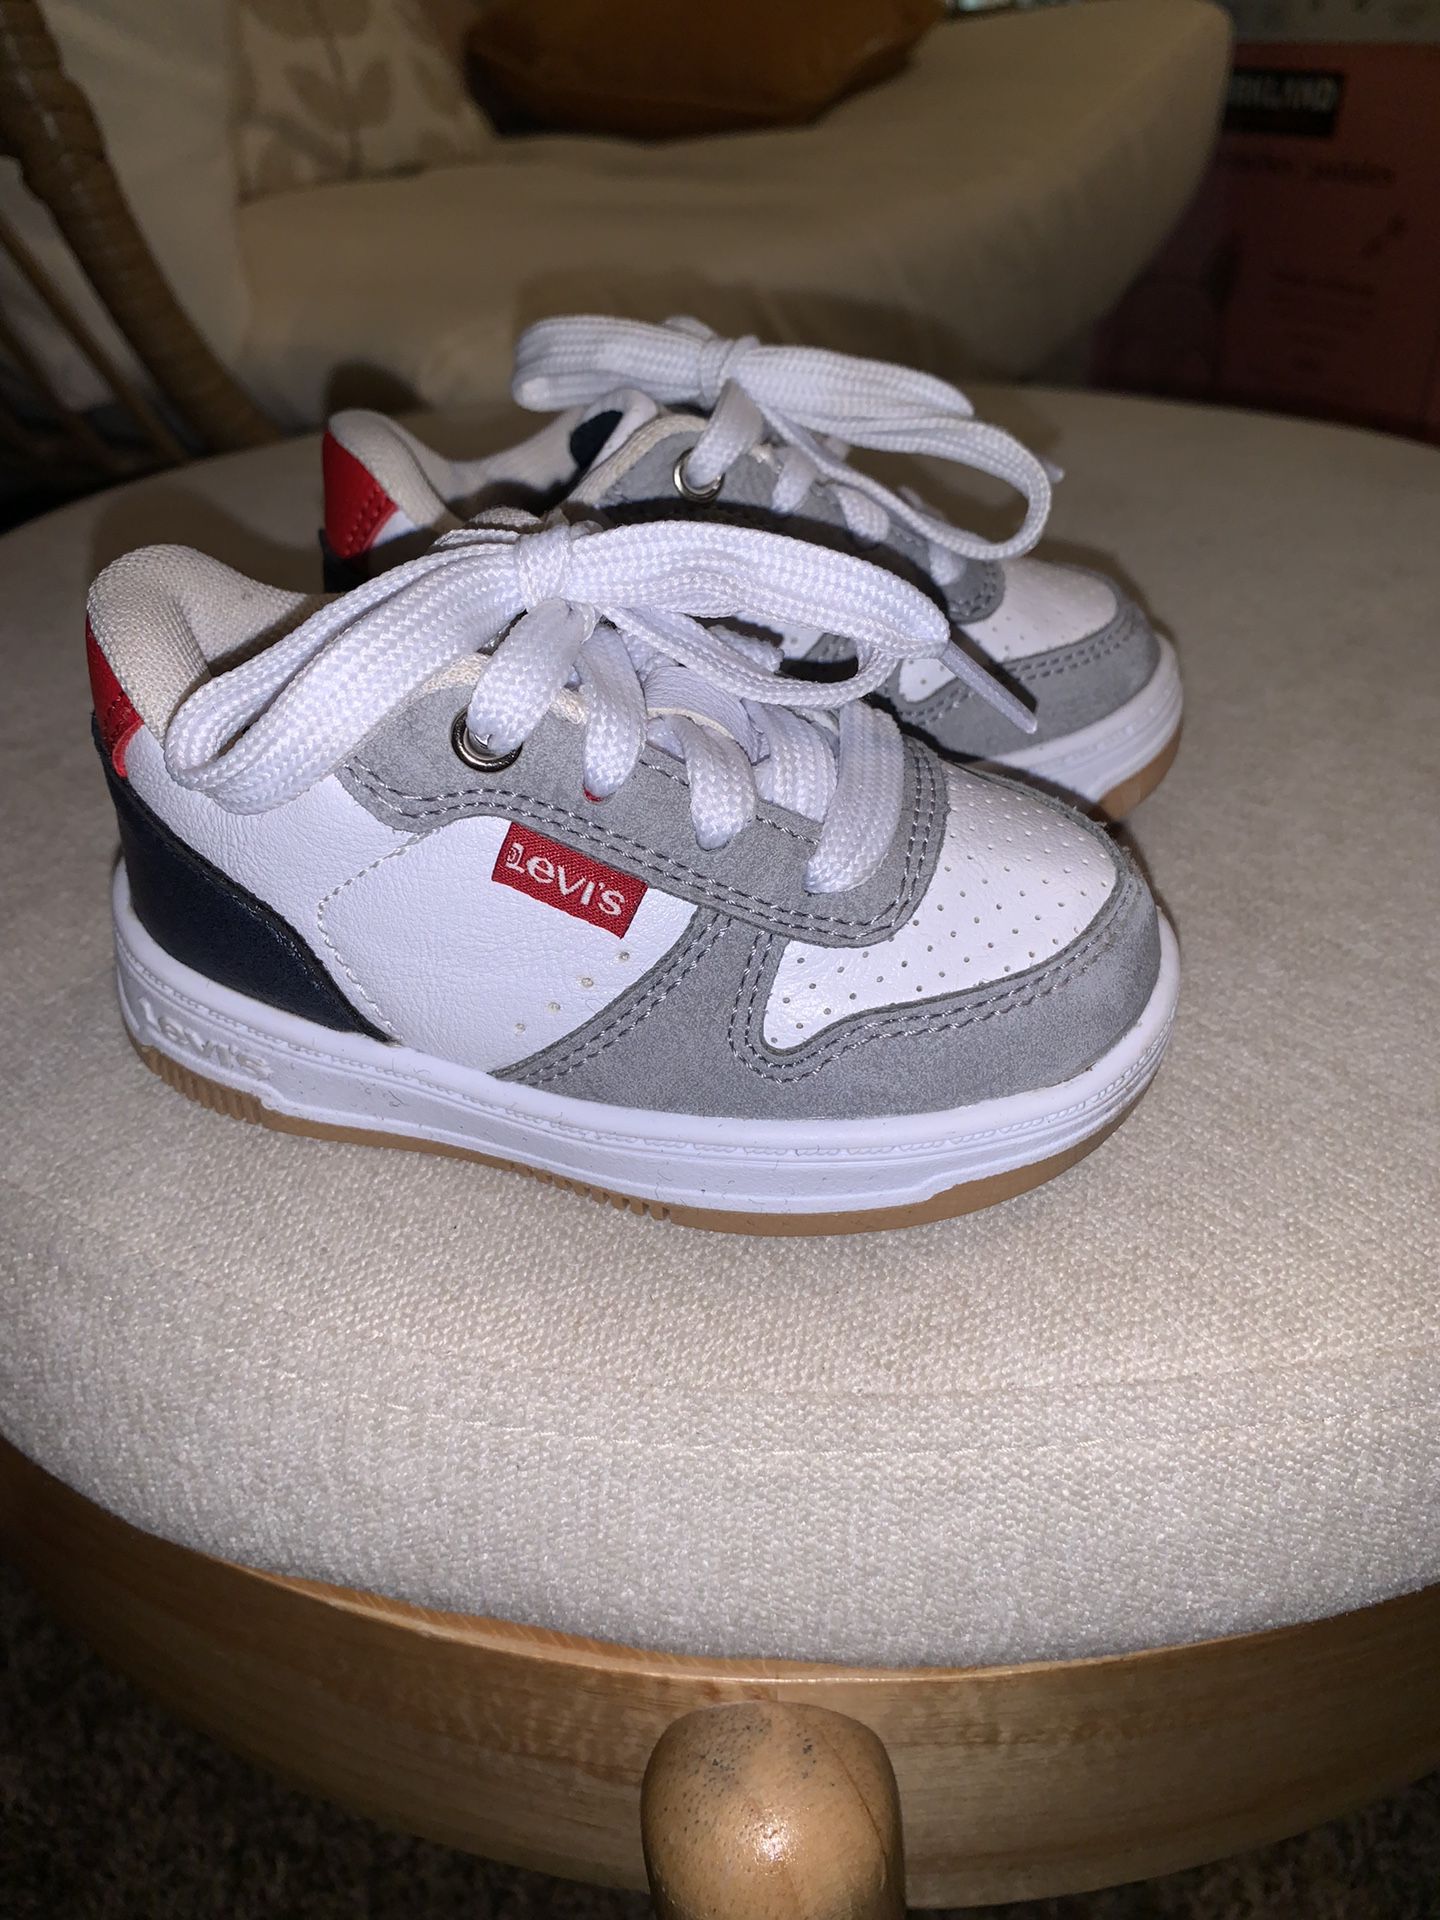 Levis Toddler Size 5